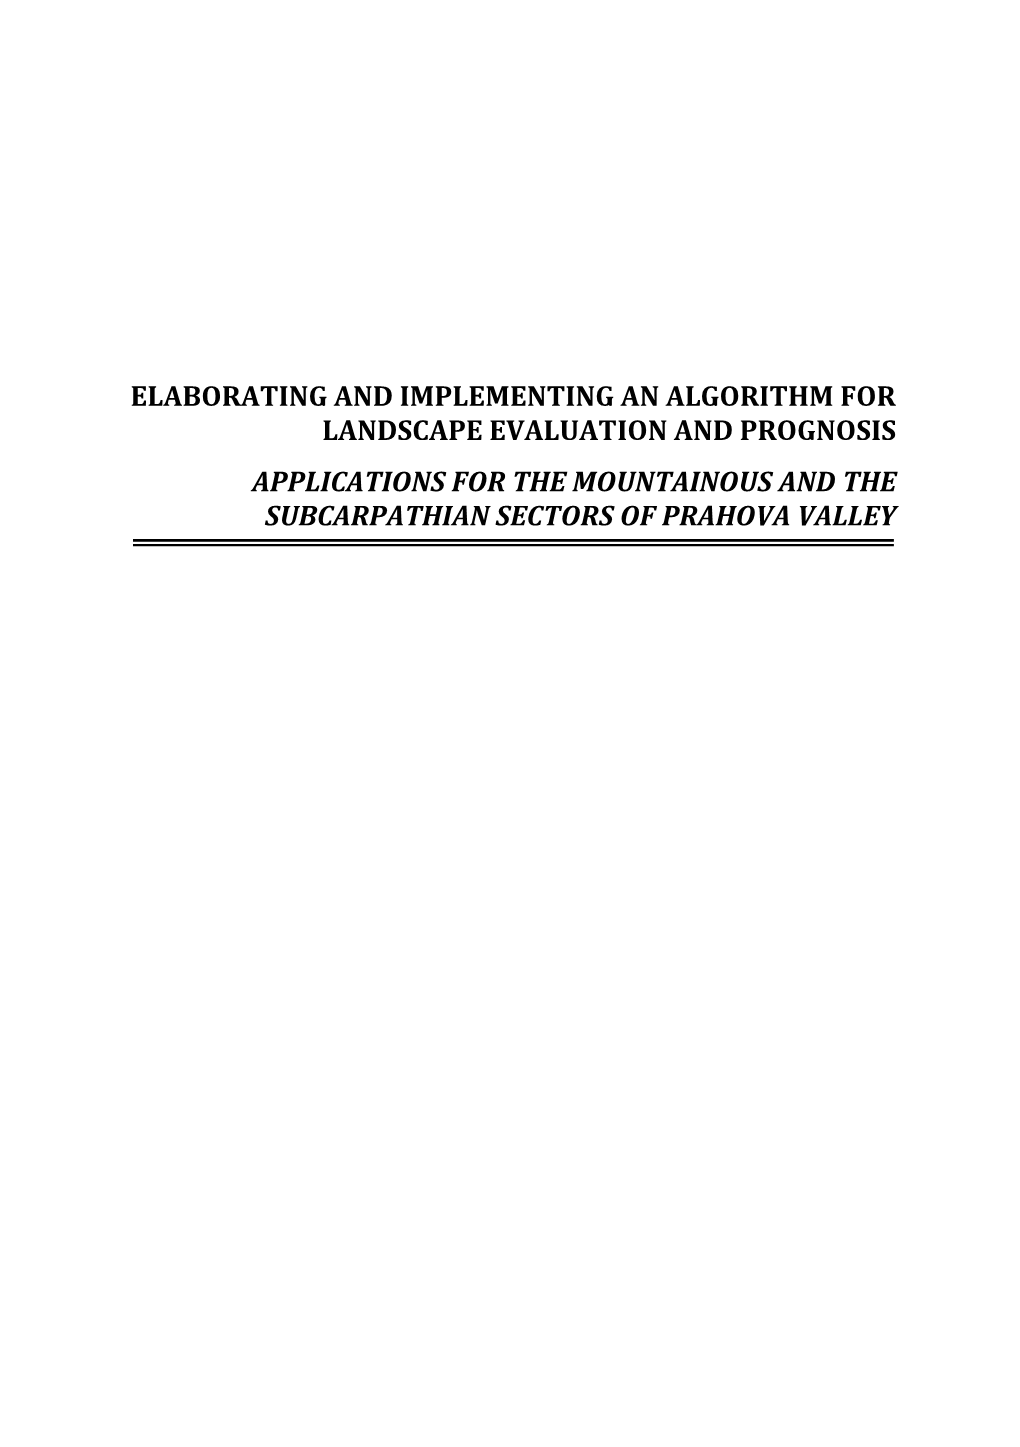 Elaborating and Implementing an Algorithm For